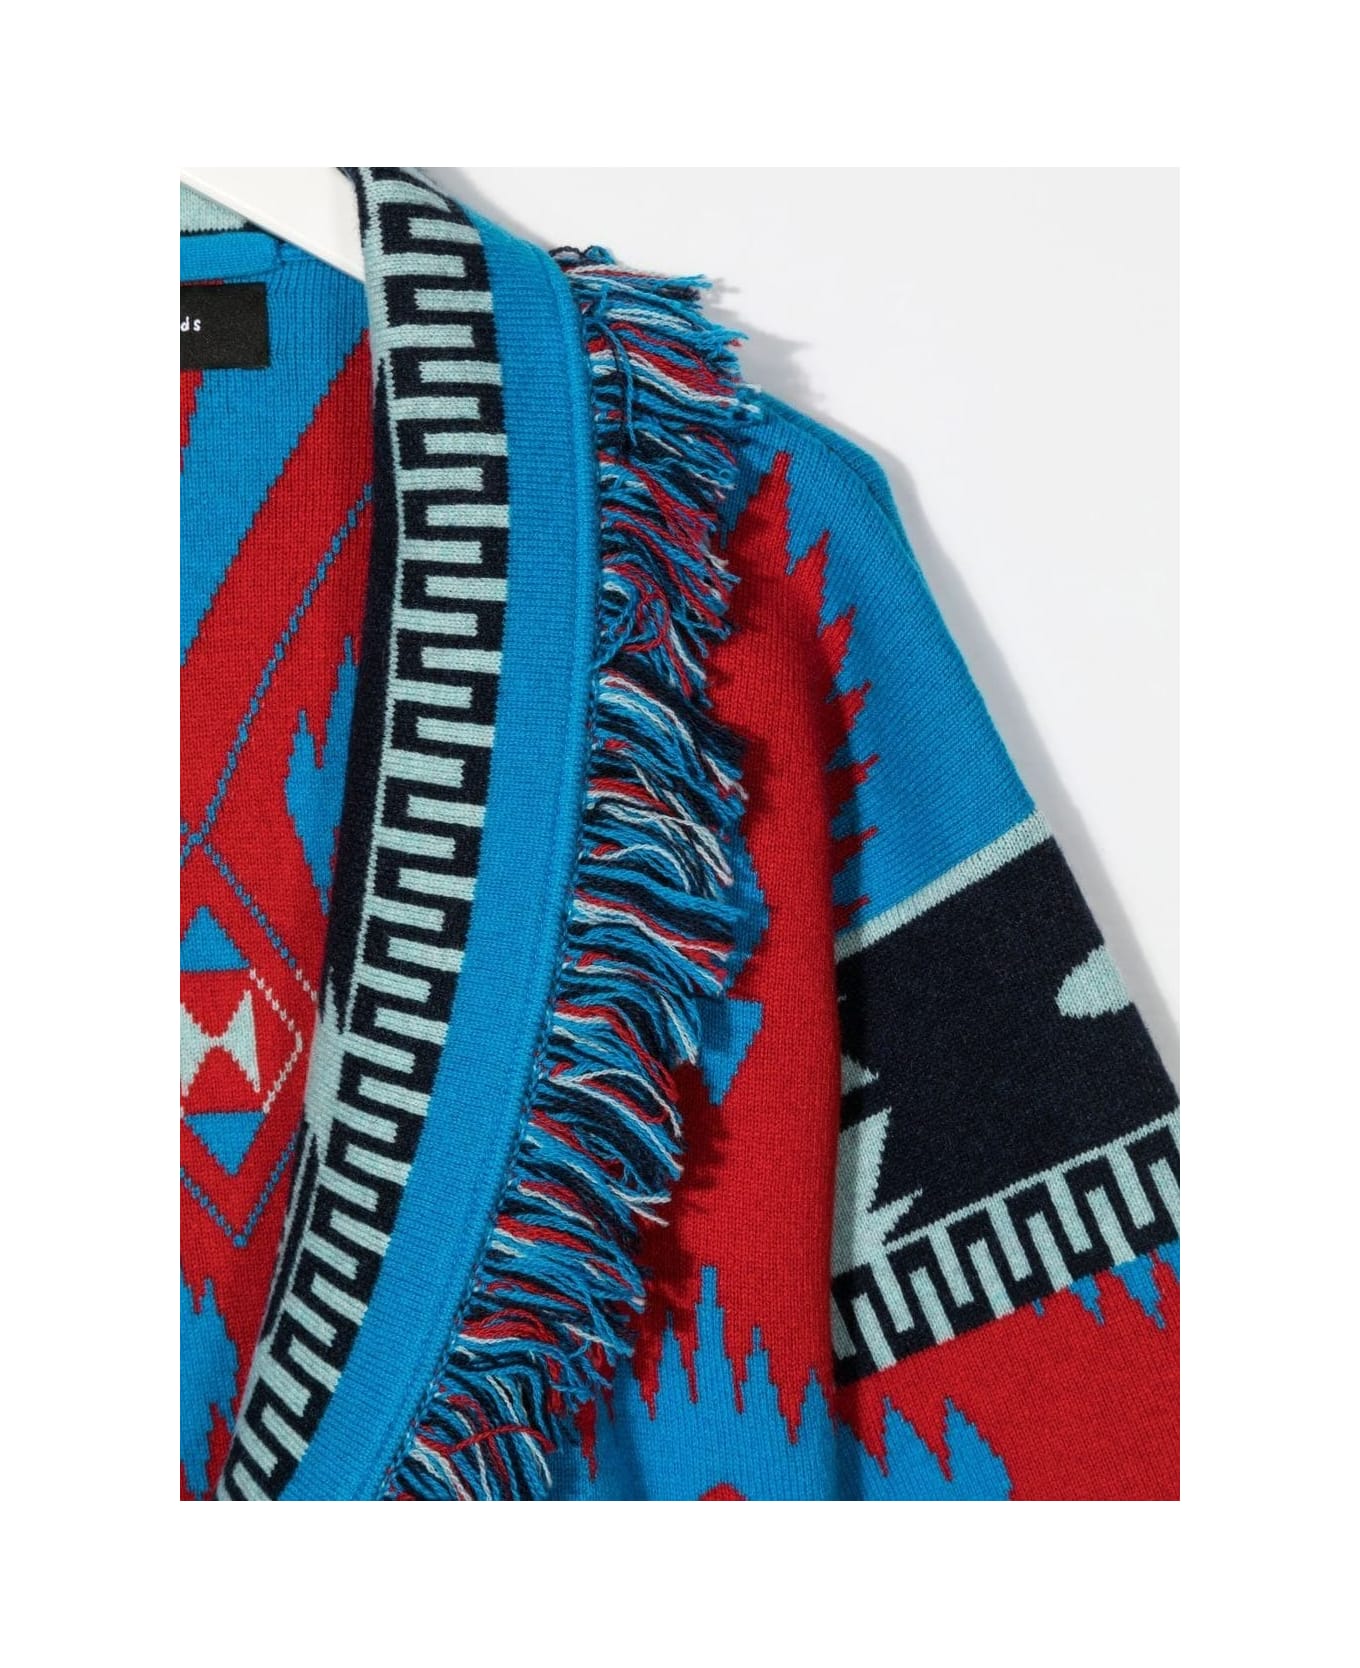 Alanui Kids Icon Cardigan In Blue And Red Cashmere - Multicolour